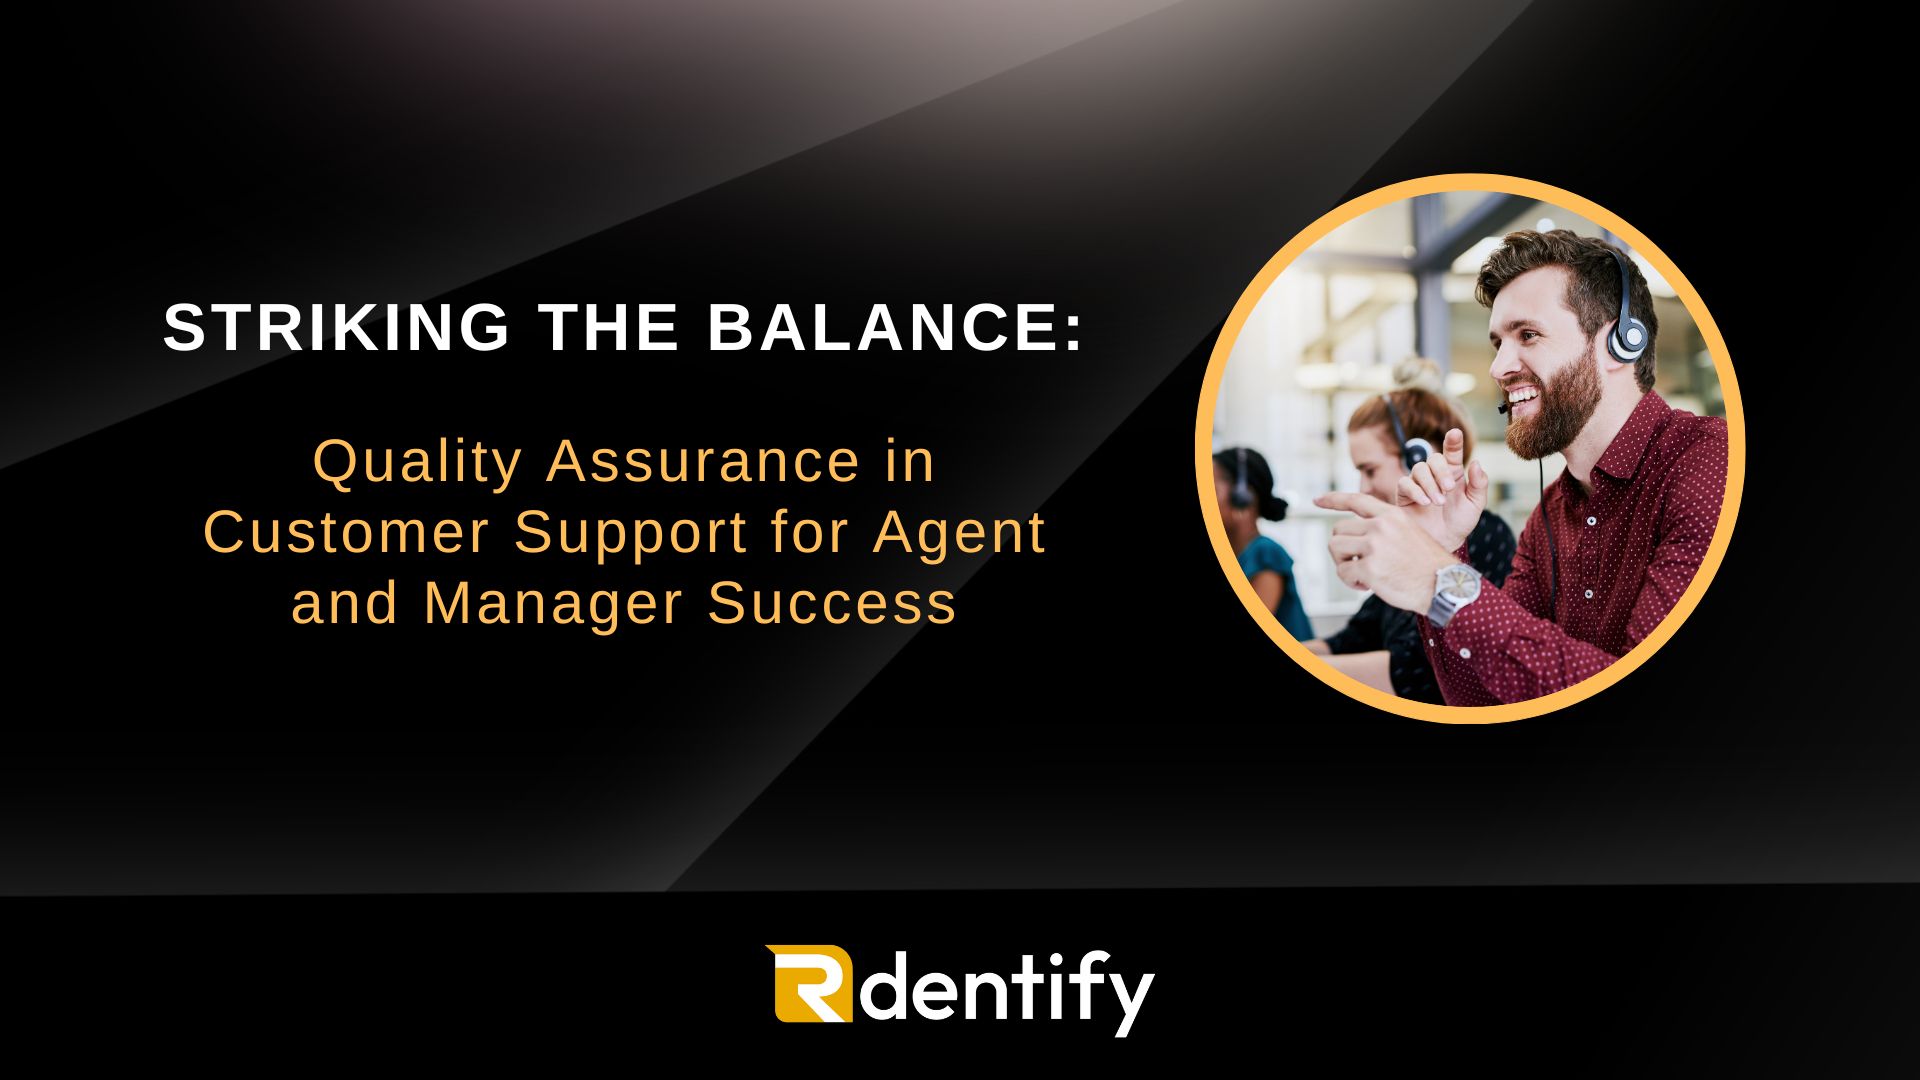 The Crucial Role of Quality Assurance in Customer Support: A Win-Win for Agents and Managers